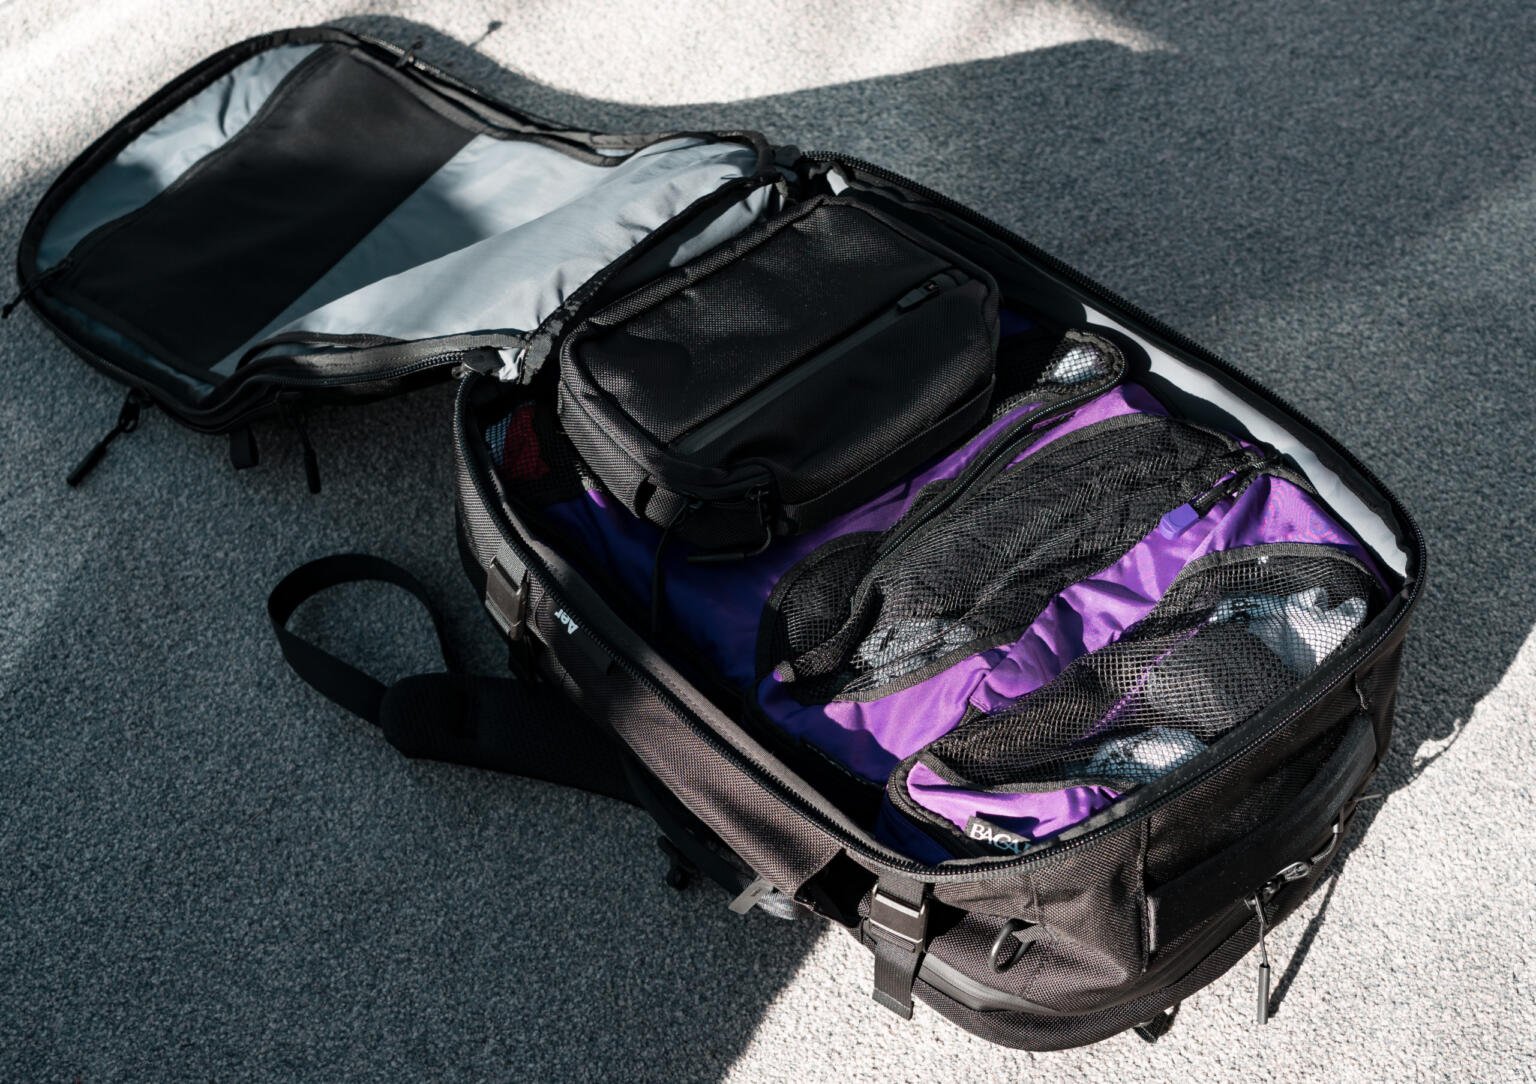 AER Travel Pack 3 Review: The Perfect One Bag Travel Backpack